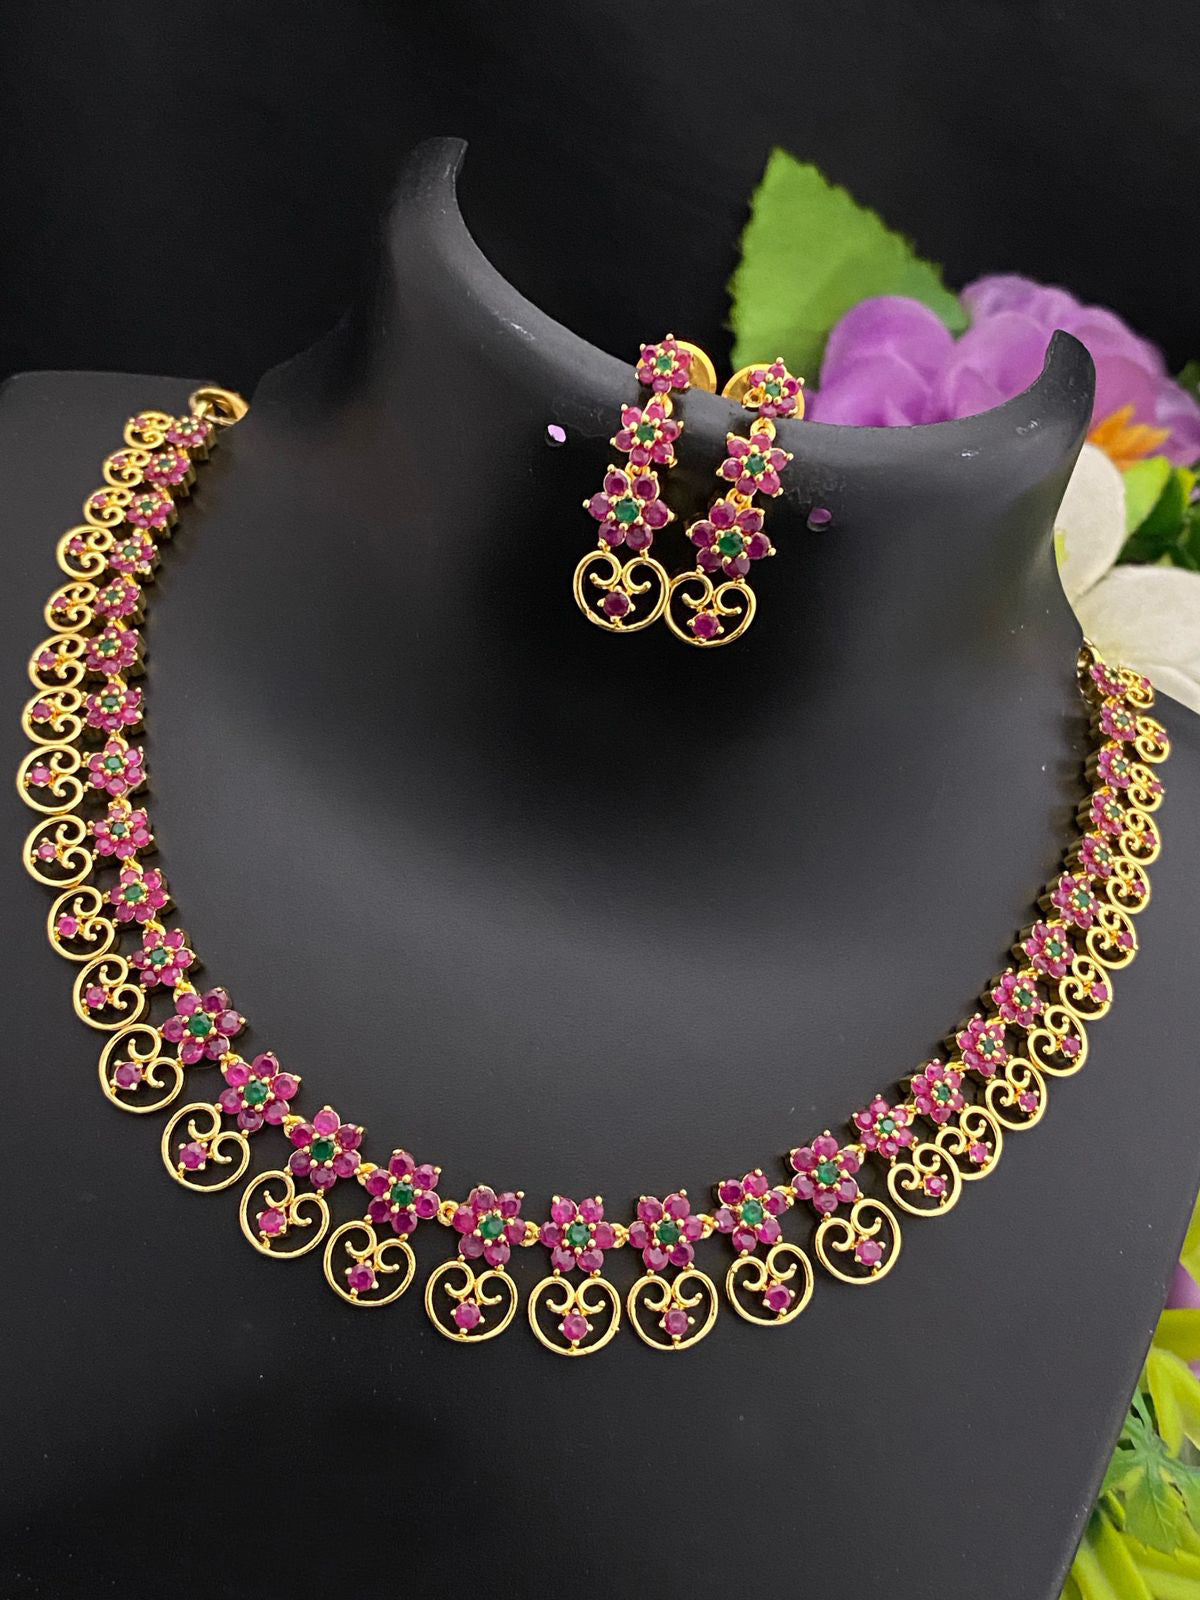 22k Gold Indian Jewelry Necklace with Earing